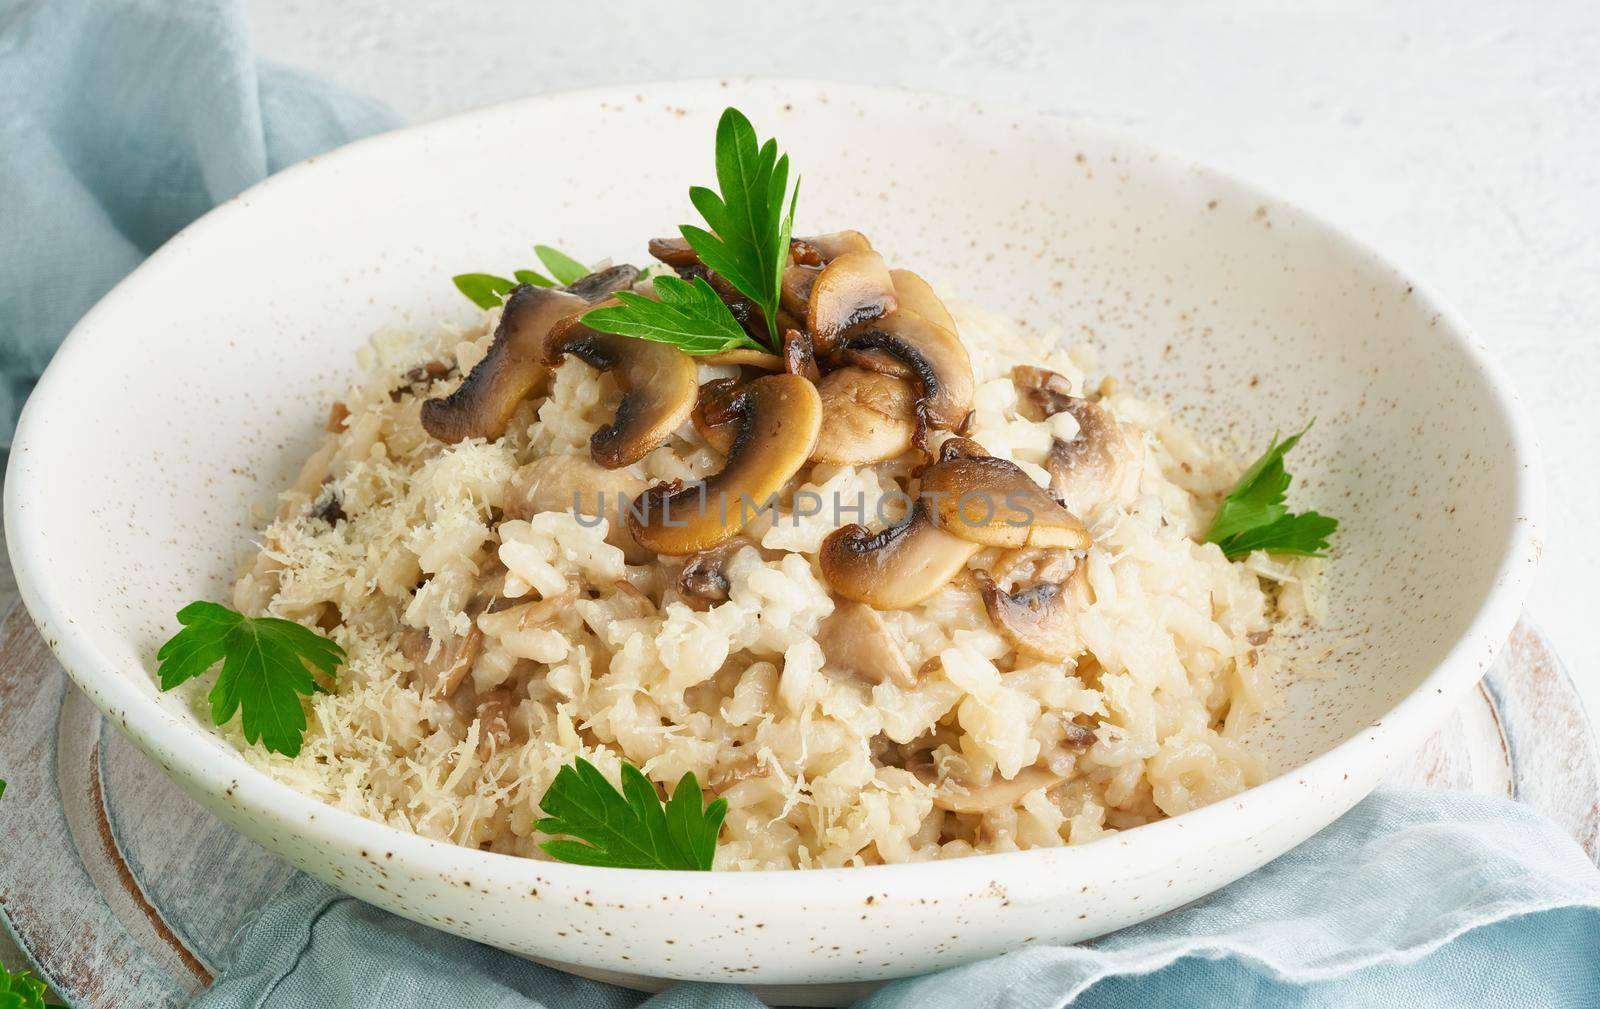 Risotto with mushrooms in plate. Rice porridge with mushrooms and parsley. White table, spoons, mushrooms. Hot dish, italian cuisine, side view